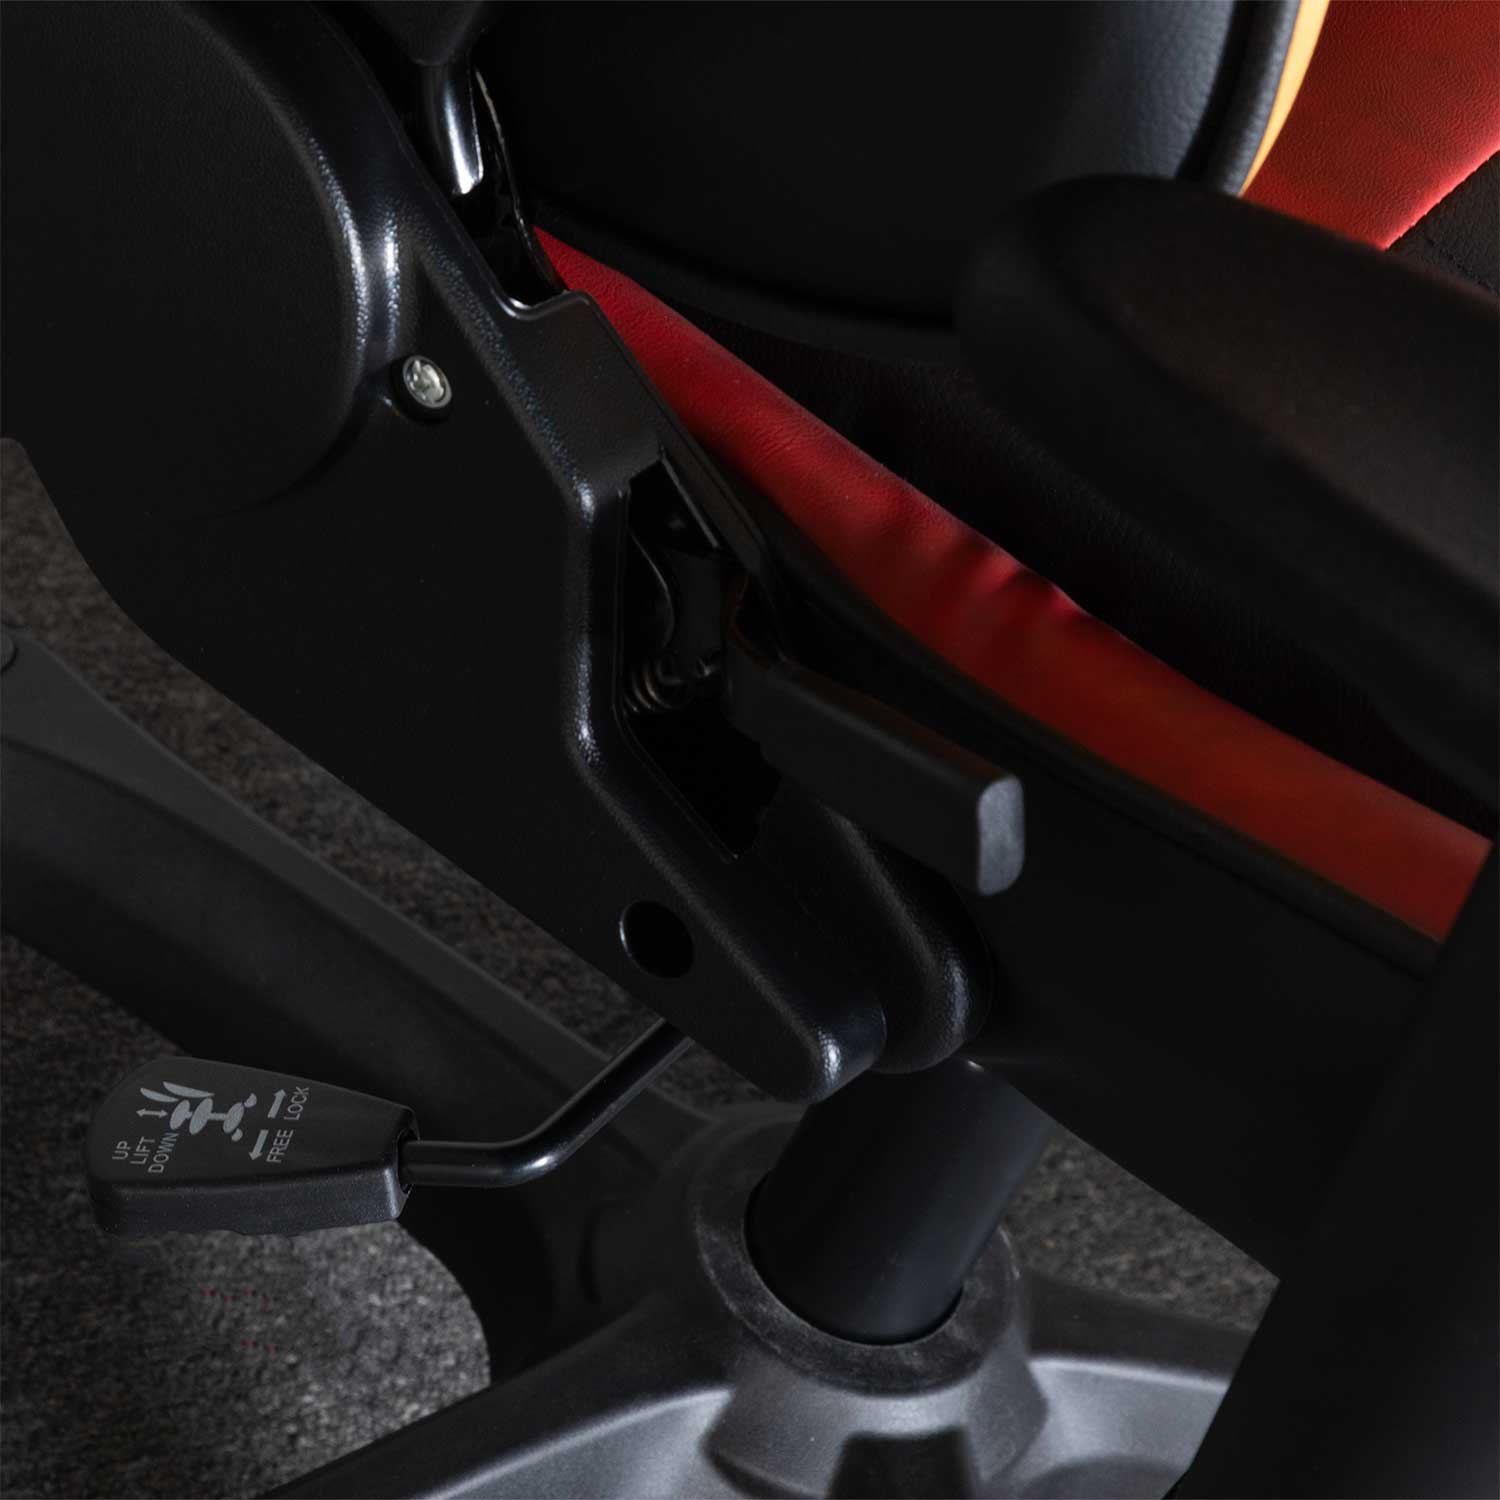 Neo Iron Man Gaming Chair | Z-8188-IRON | AFW.com